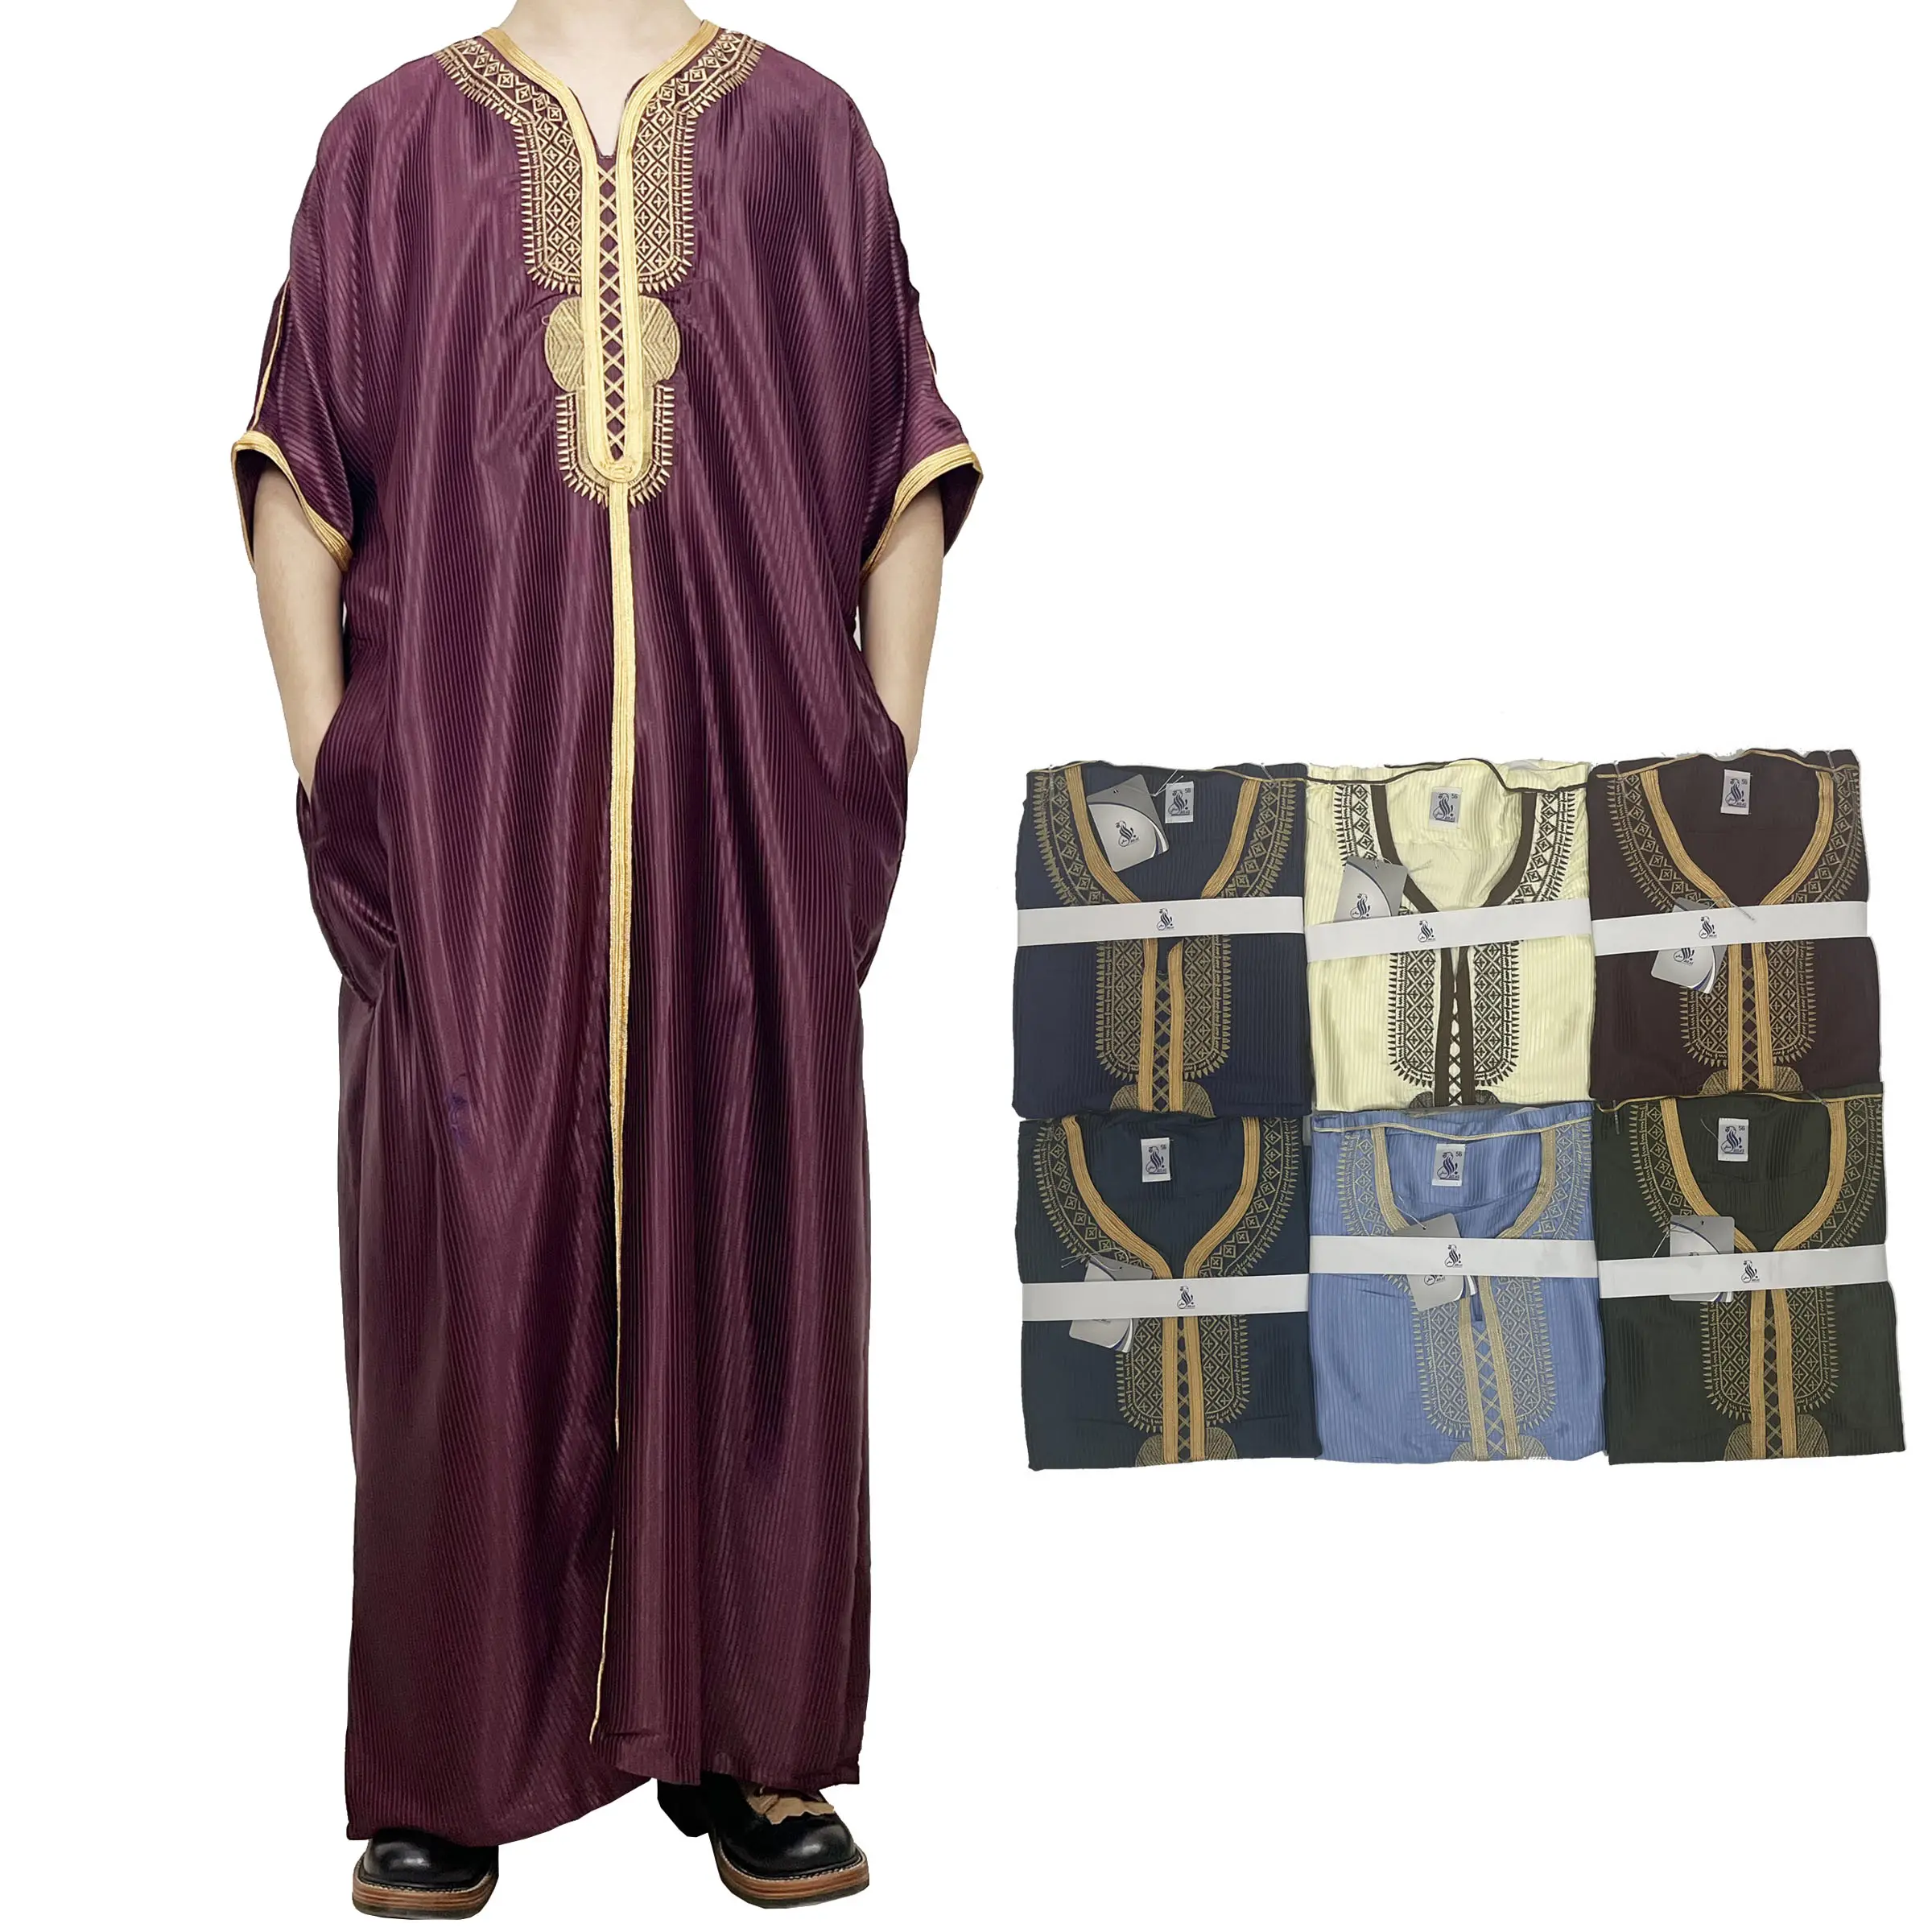 New Arrival Moroccan Style Men's Delicate Embroidered Caftan Shiny Fabric Silk Stripe Pattern Short Sleeve Men Thobe